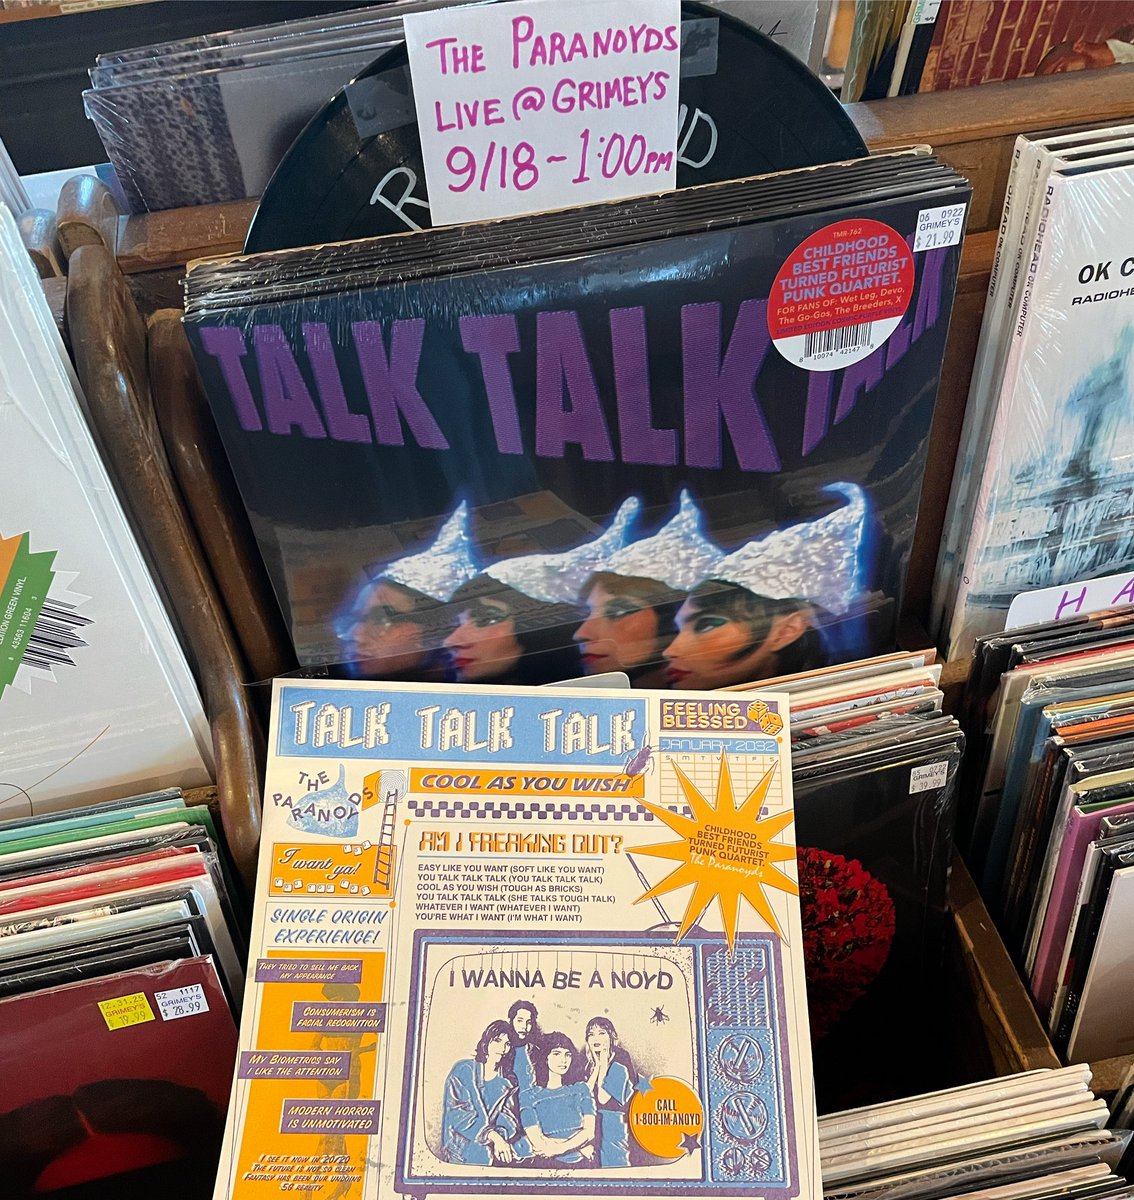 Today is the day—@theparanoyds911 play a free & all-ages set in the record store at 1:00 pm! Come by for a fun time & check out some tunes from their new album #TalkTalkTalk on @thirdmanrecords 💜💜💜 #theparanoyds #sundayfunday #nashville #freefun